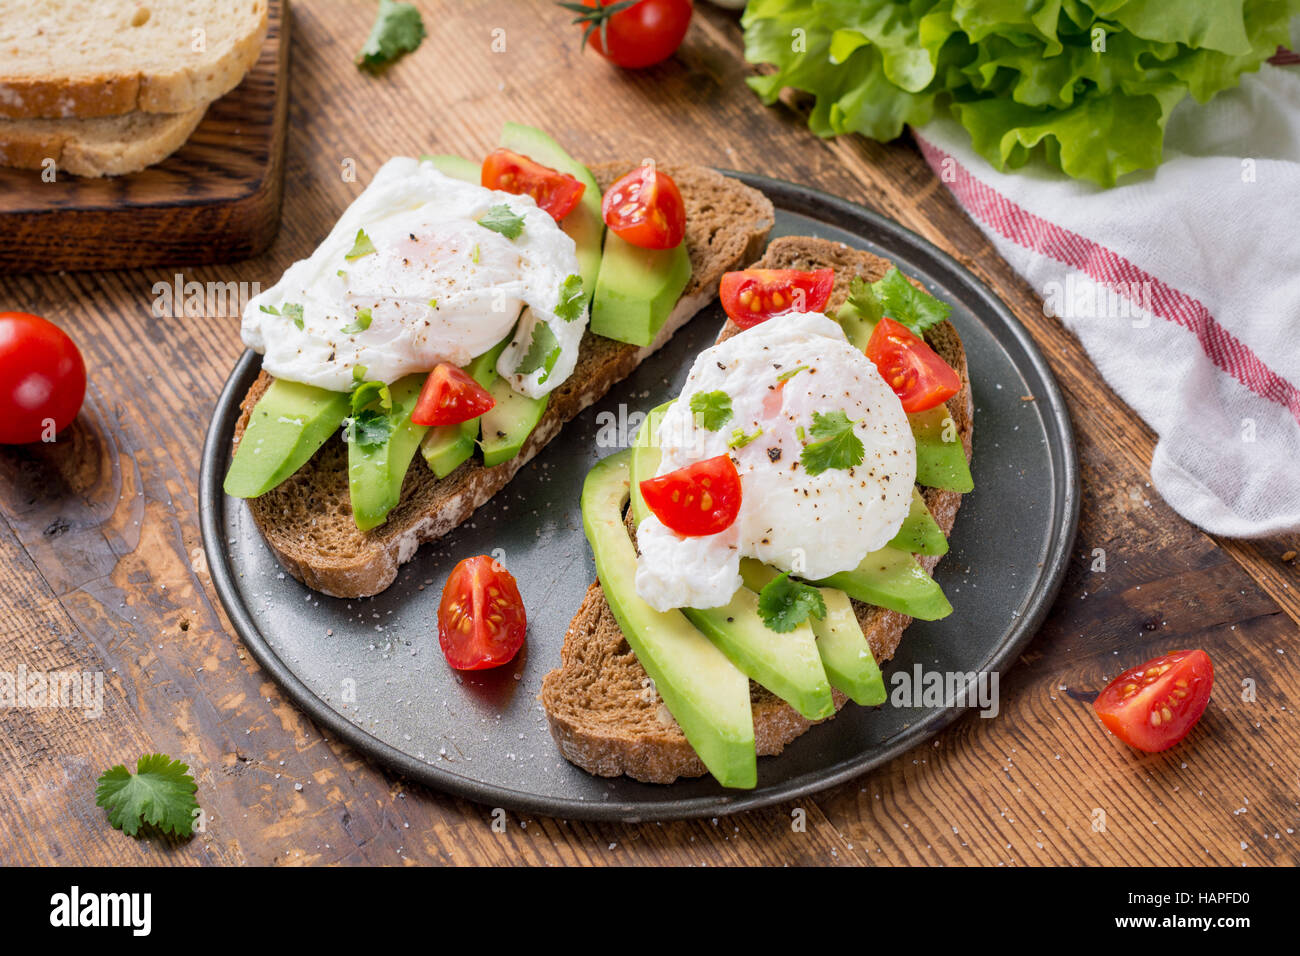 Close up view of delicious poached egg and avocado toasts garnished with chopped parsley. Selective focus Stock Photo